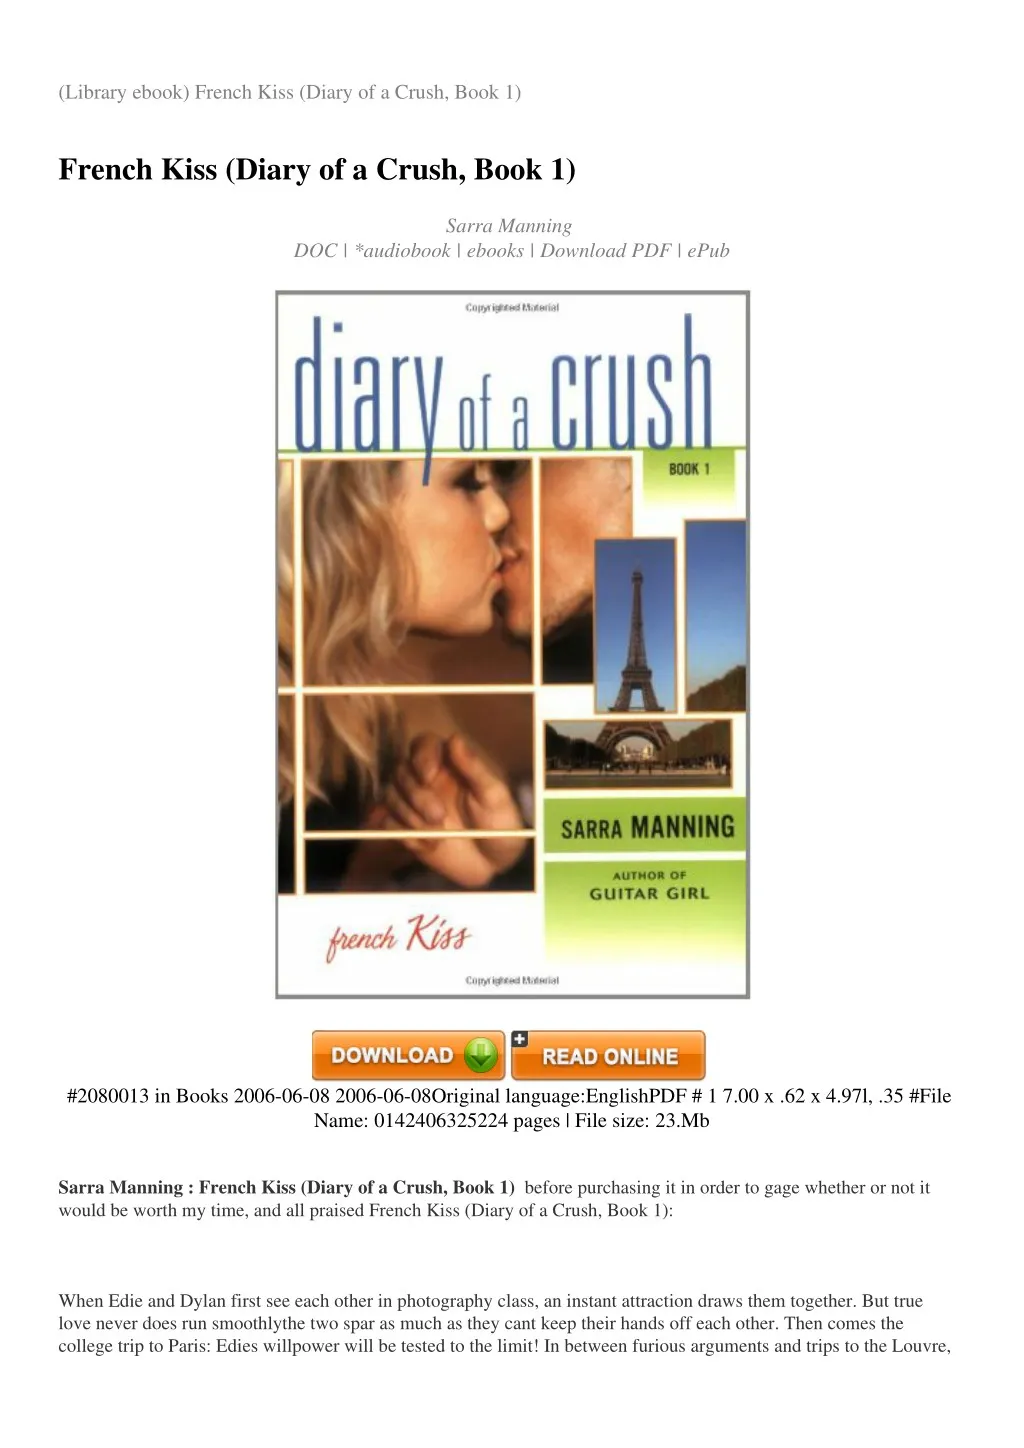 library ebook french kiss diary of a crush book 1